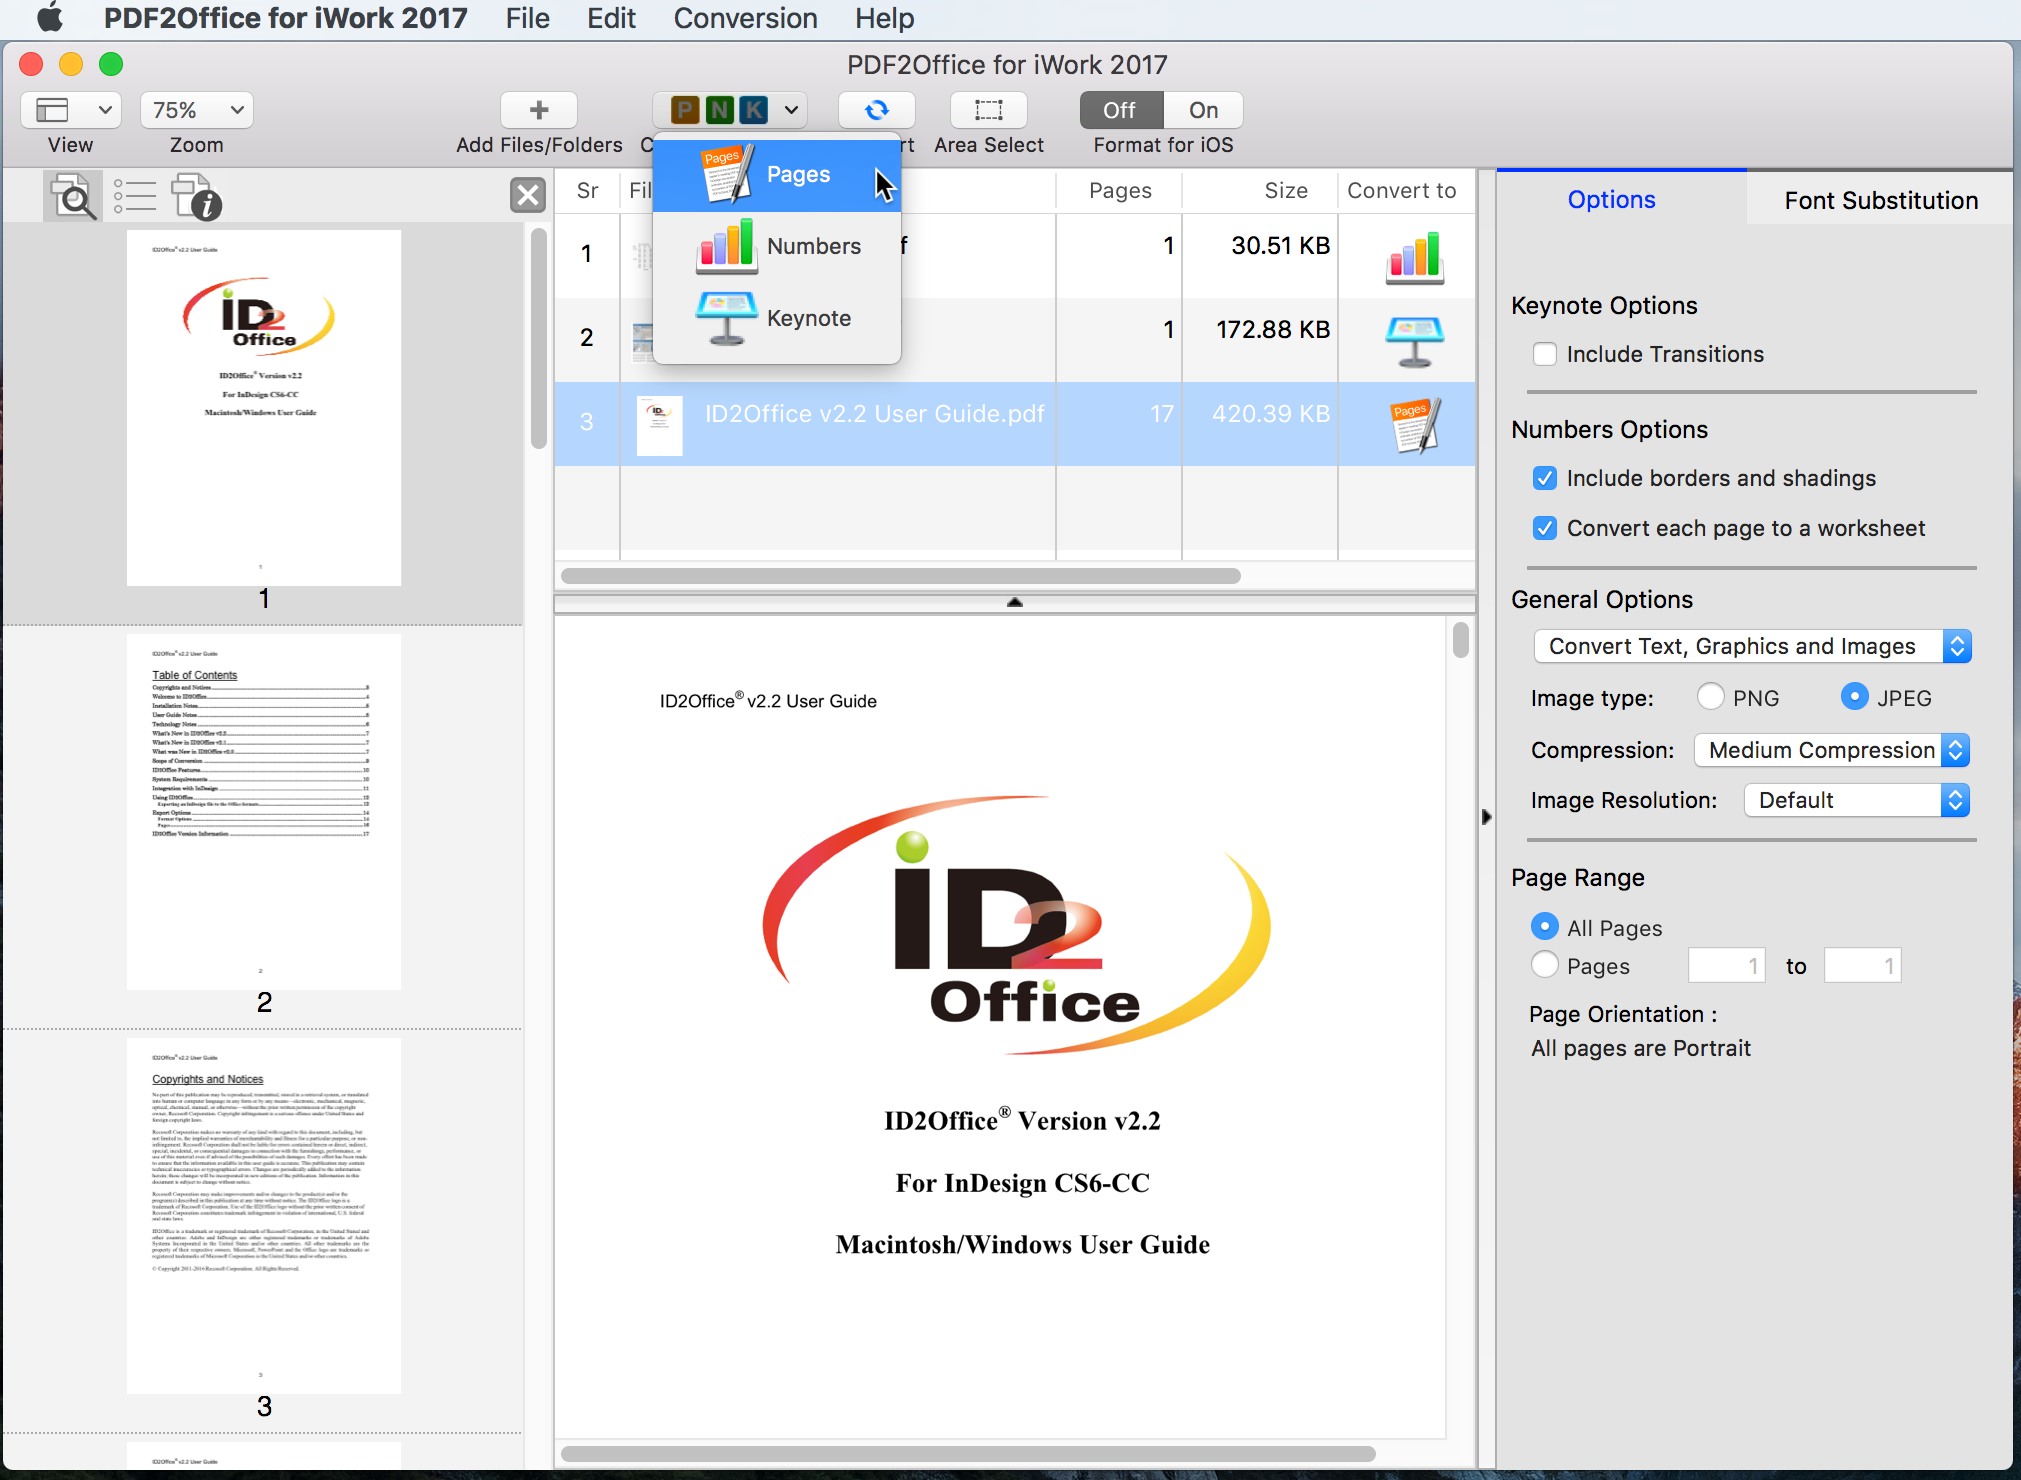 PDF2Office for iWork 2017 - PDF Converter for Pages, Keynote and Numbers Image